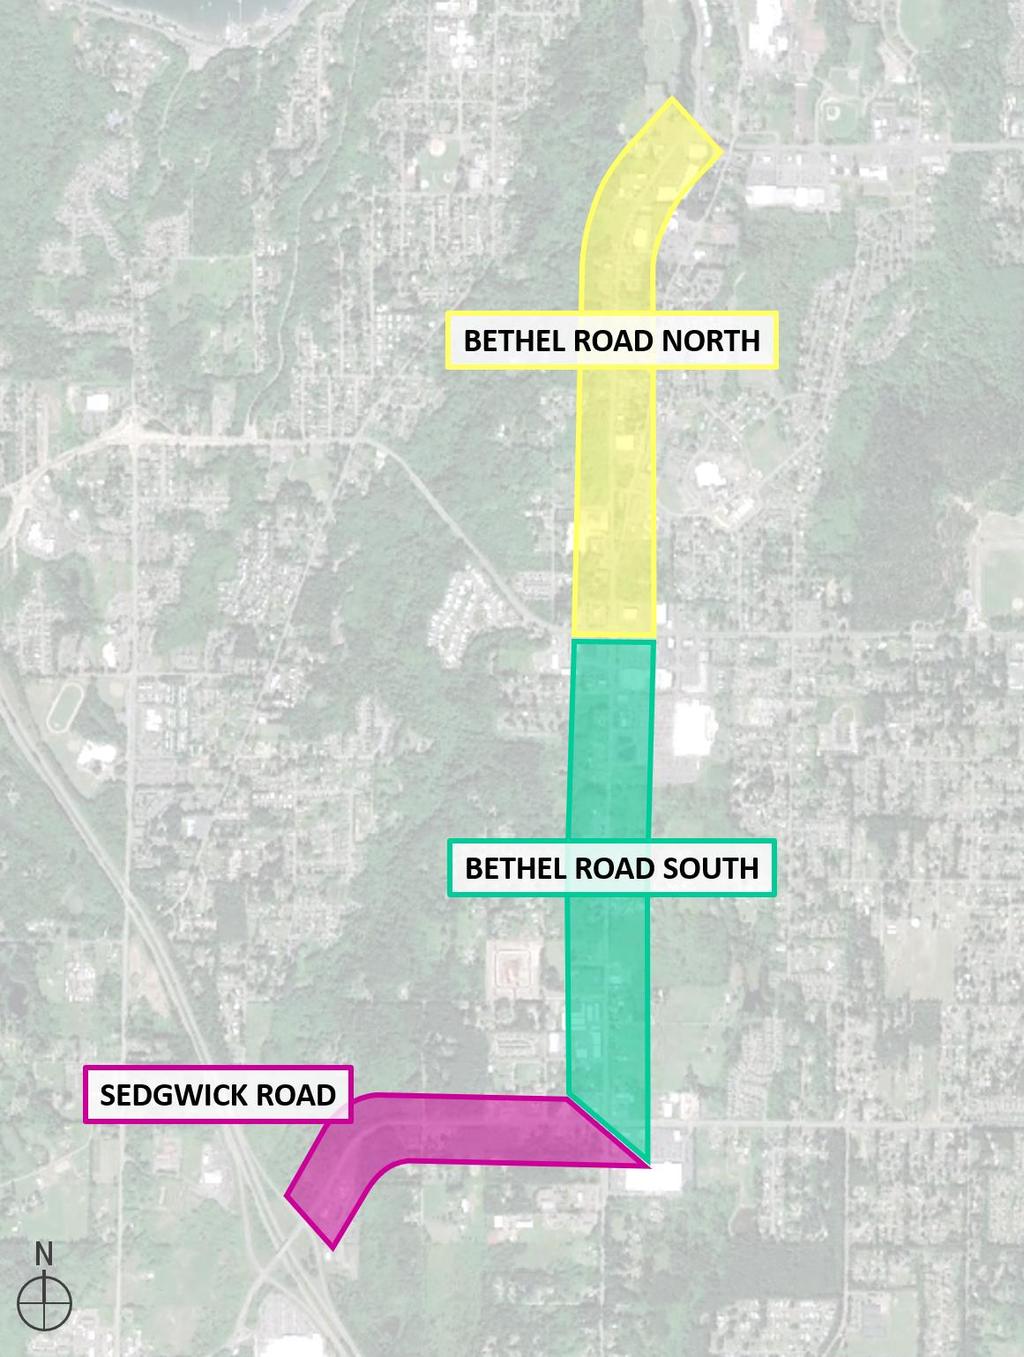 PREFERRED ALTERNATIVE STREET CHARACTER INTERSECTION CONTROL ACCESS MANAGEMENT Bethel Road North (Mile Hill Dr to Lincoln Ave) Bethel Road South (Lund Ave to Sedgwick Rd) Sedgwick Road (SR 16 to